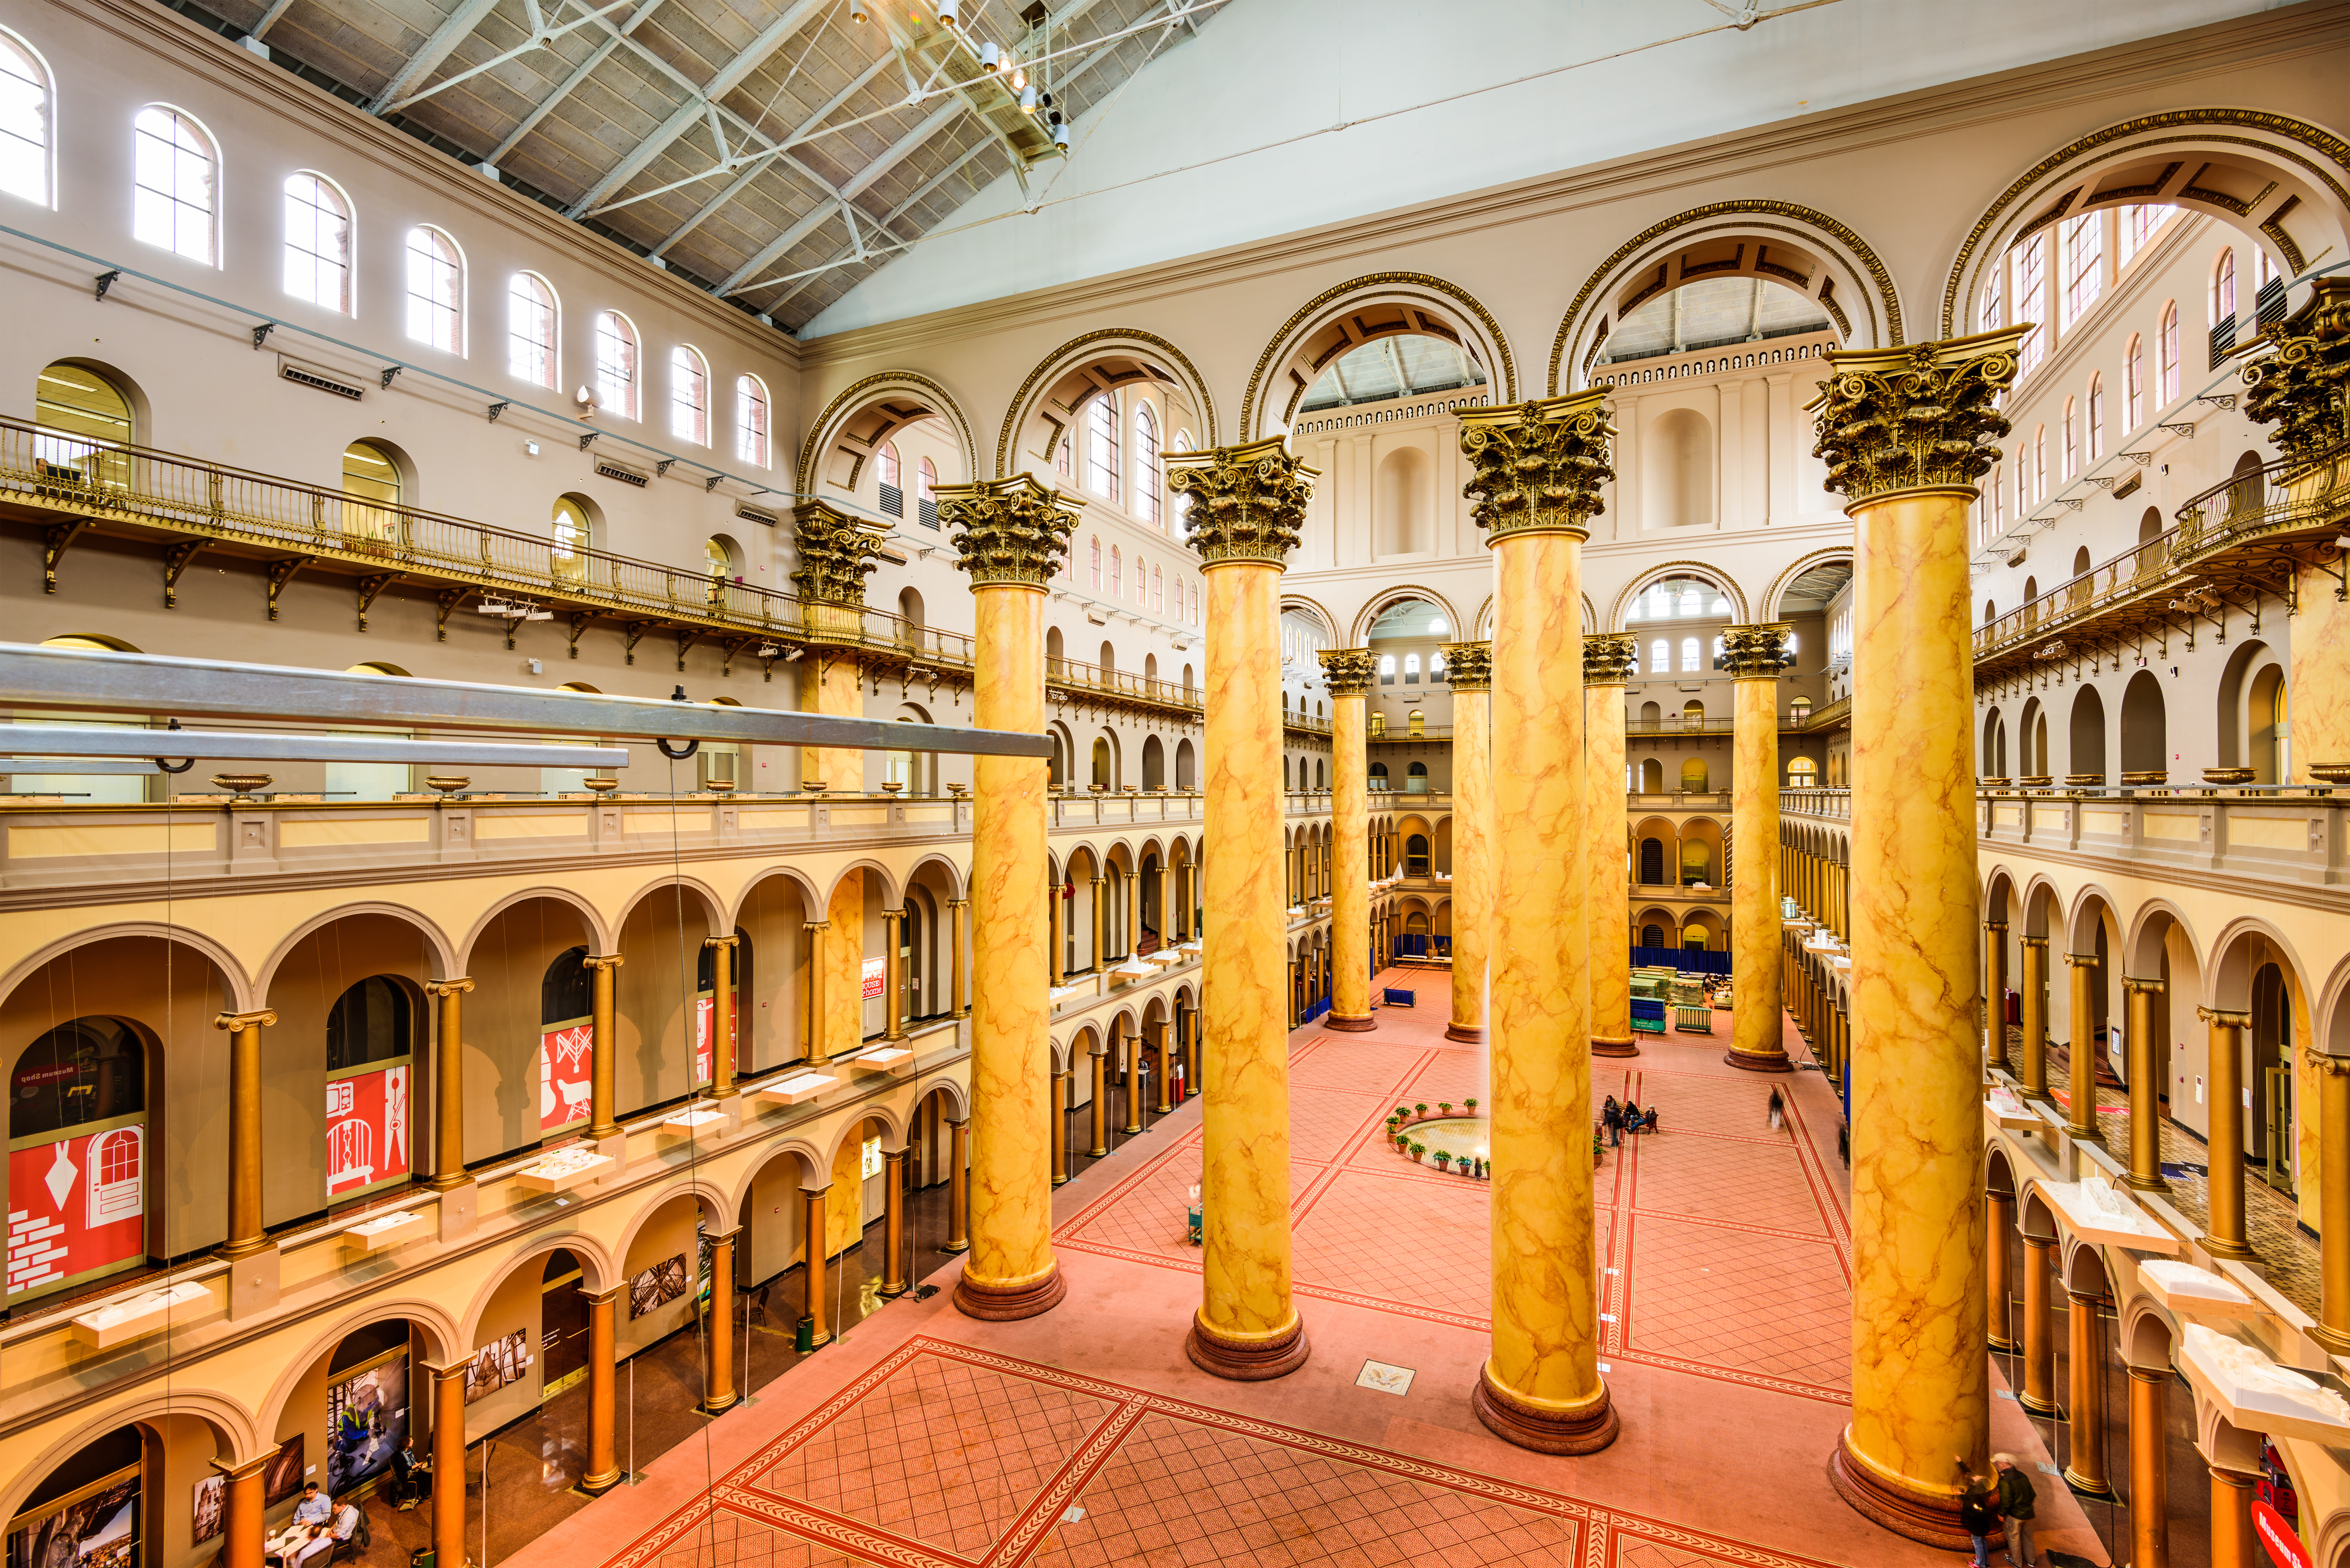 The interior of a Romanesque building. It is a tall space, with large columns, red carpet, and arches.